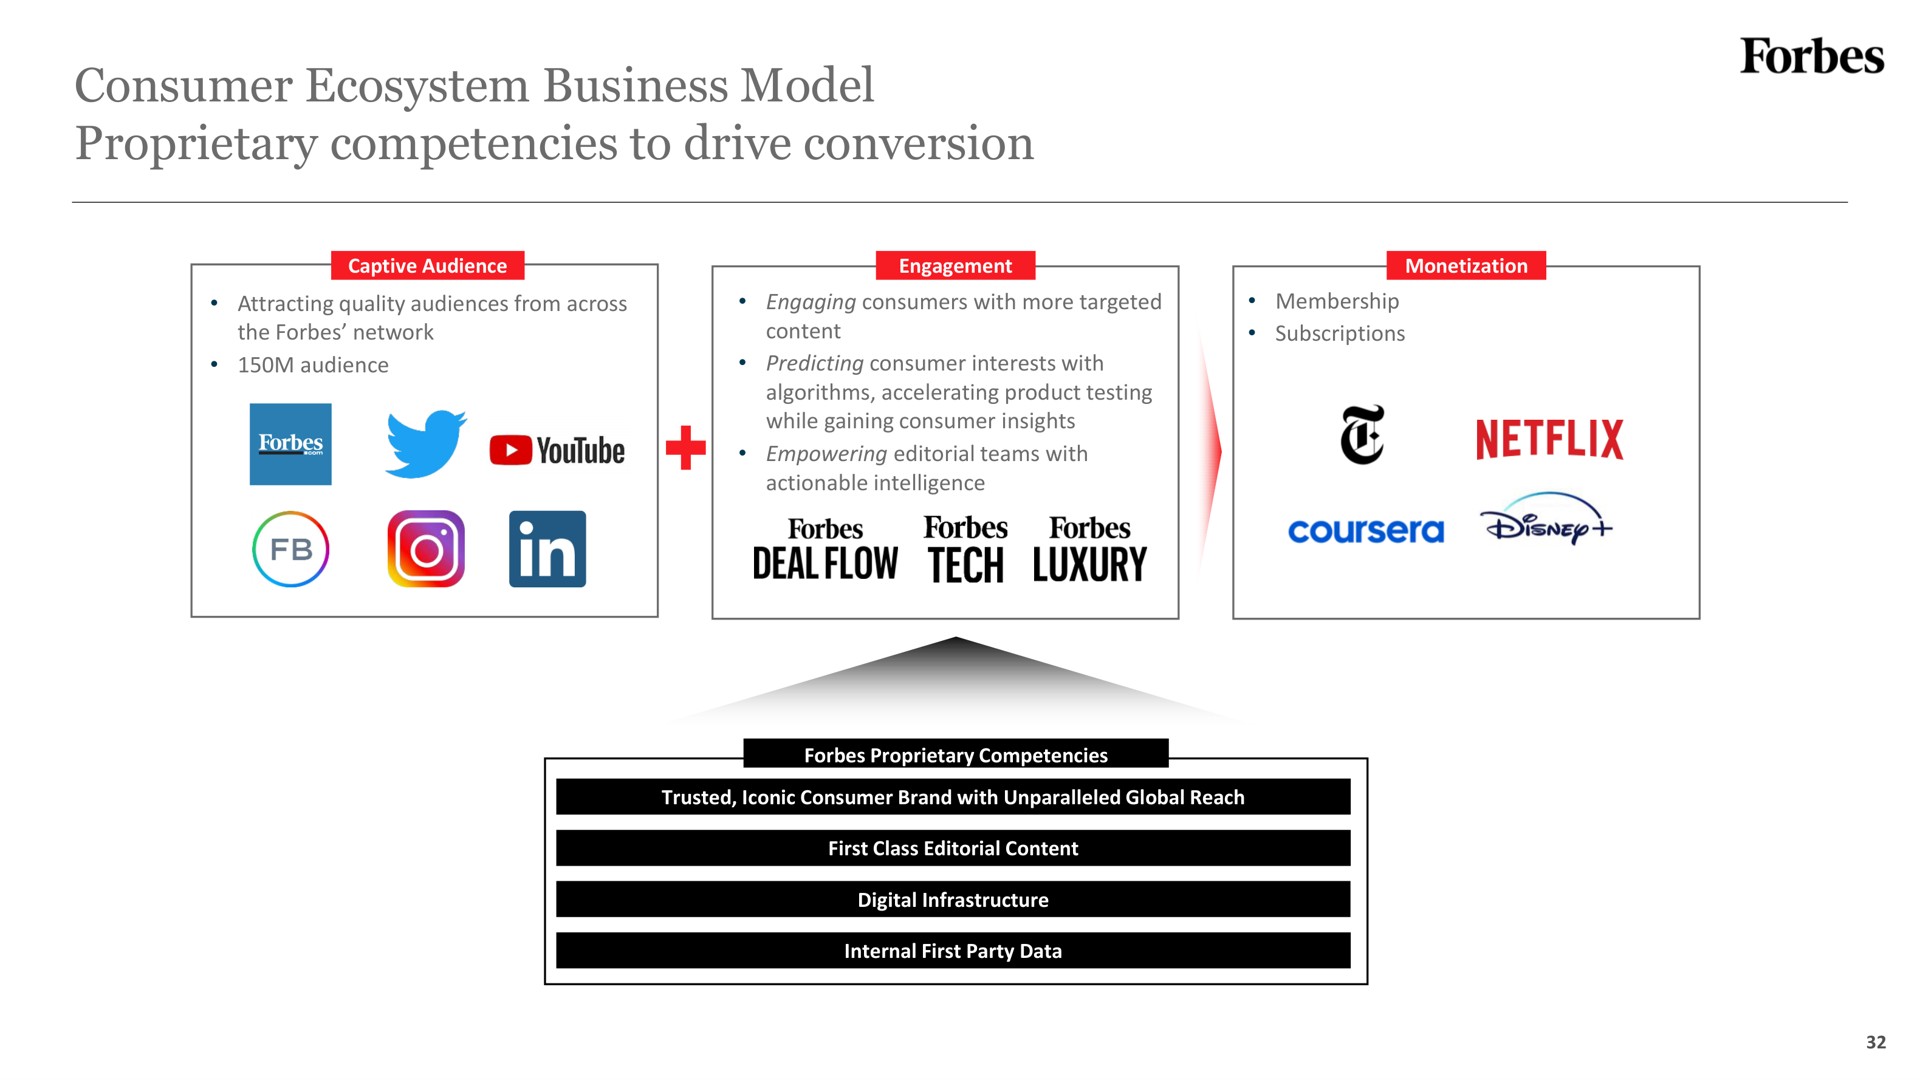 consumer ecosystem business model proprietary competencies to drive conversion of | Forbes